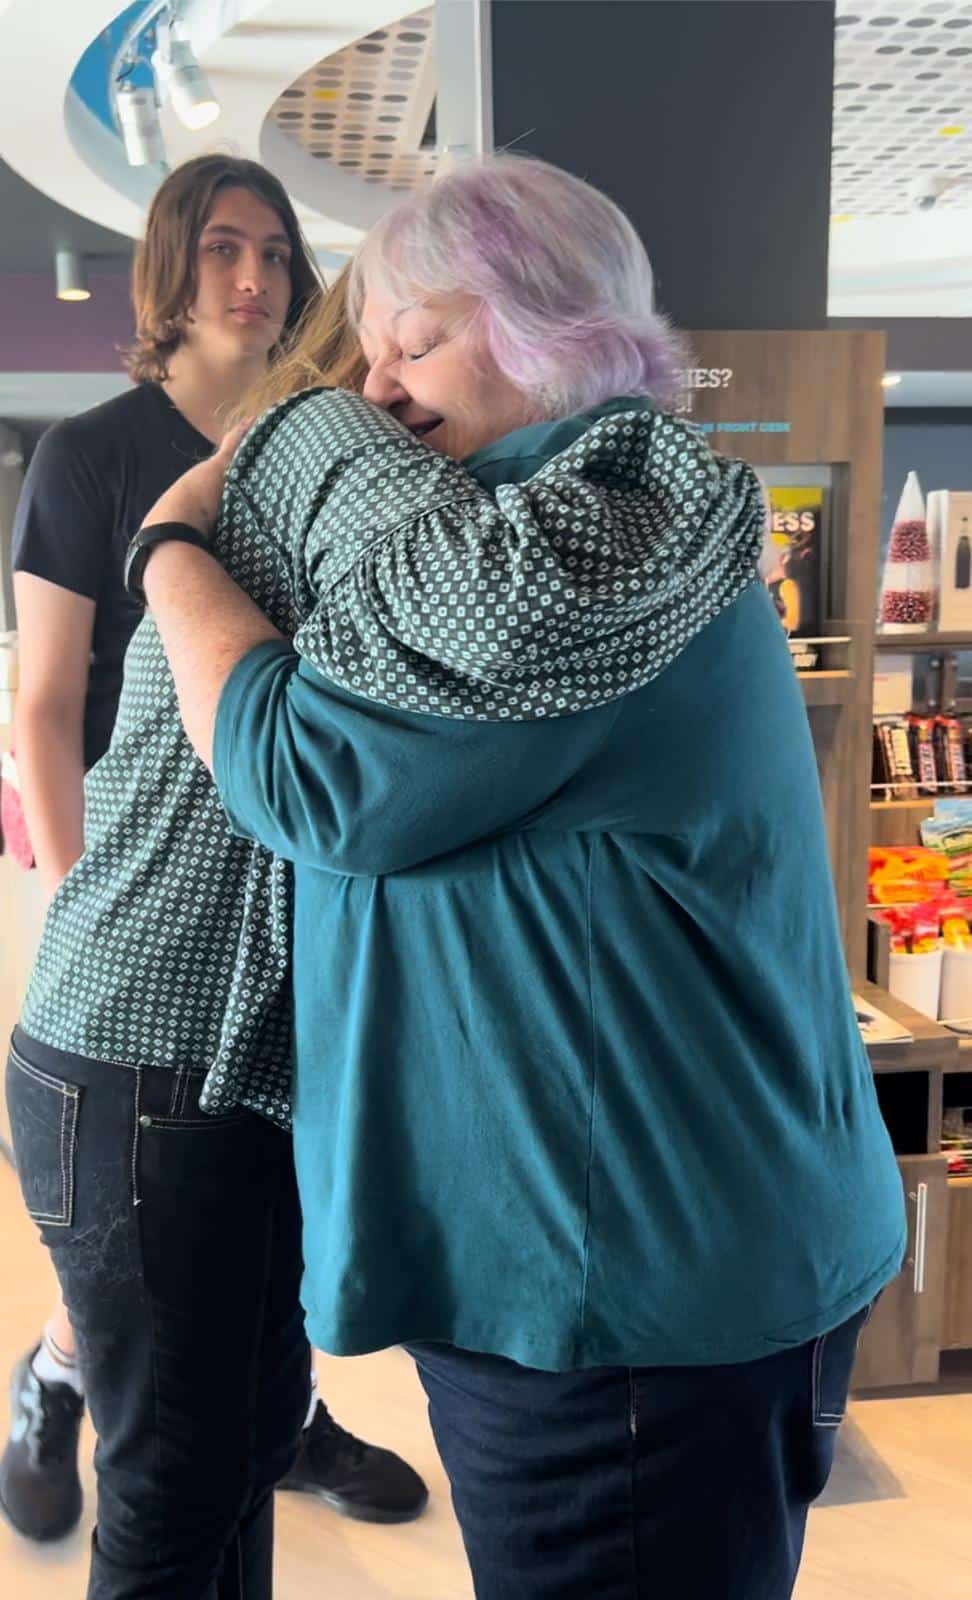 Angela embraces her daughter for the first time in 50 years